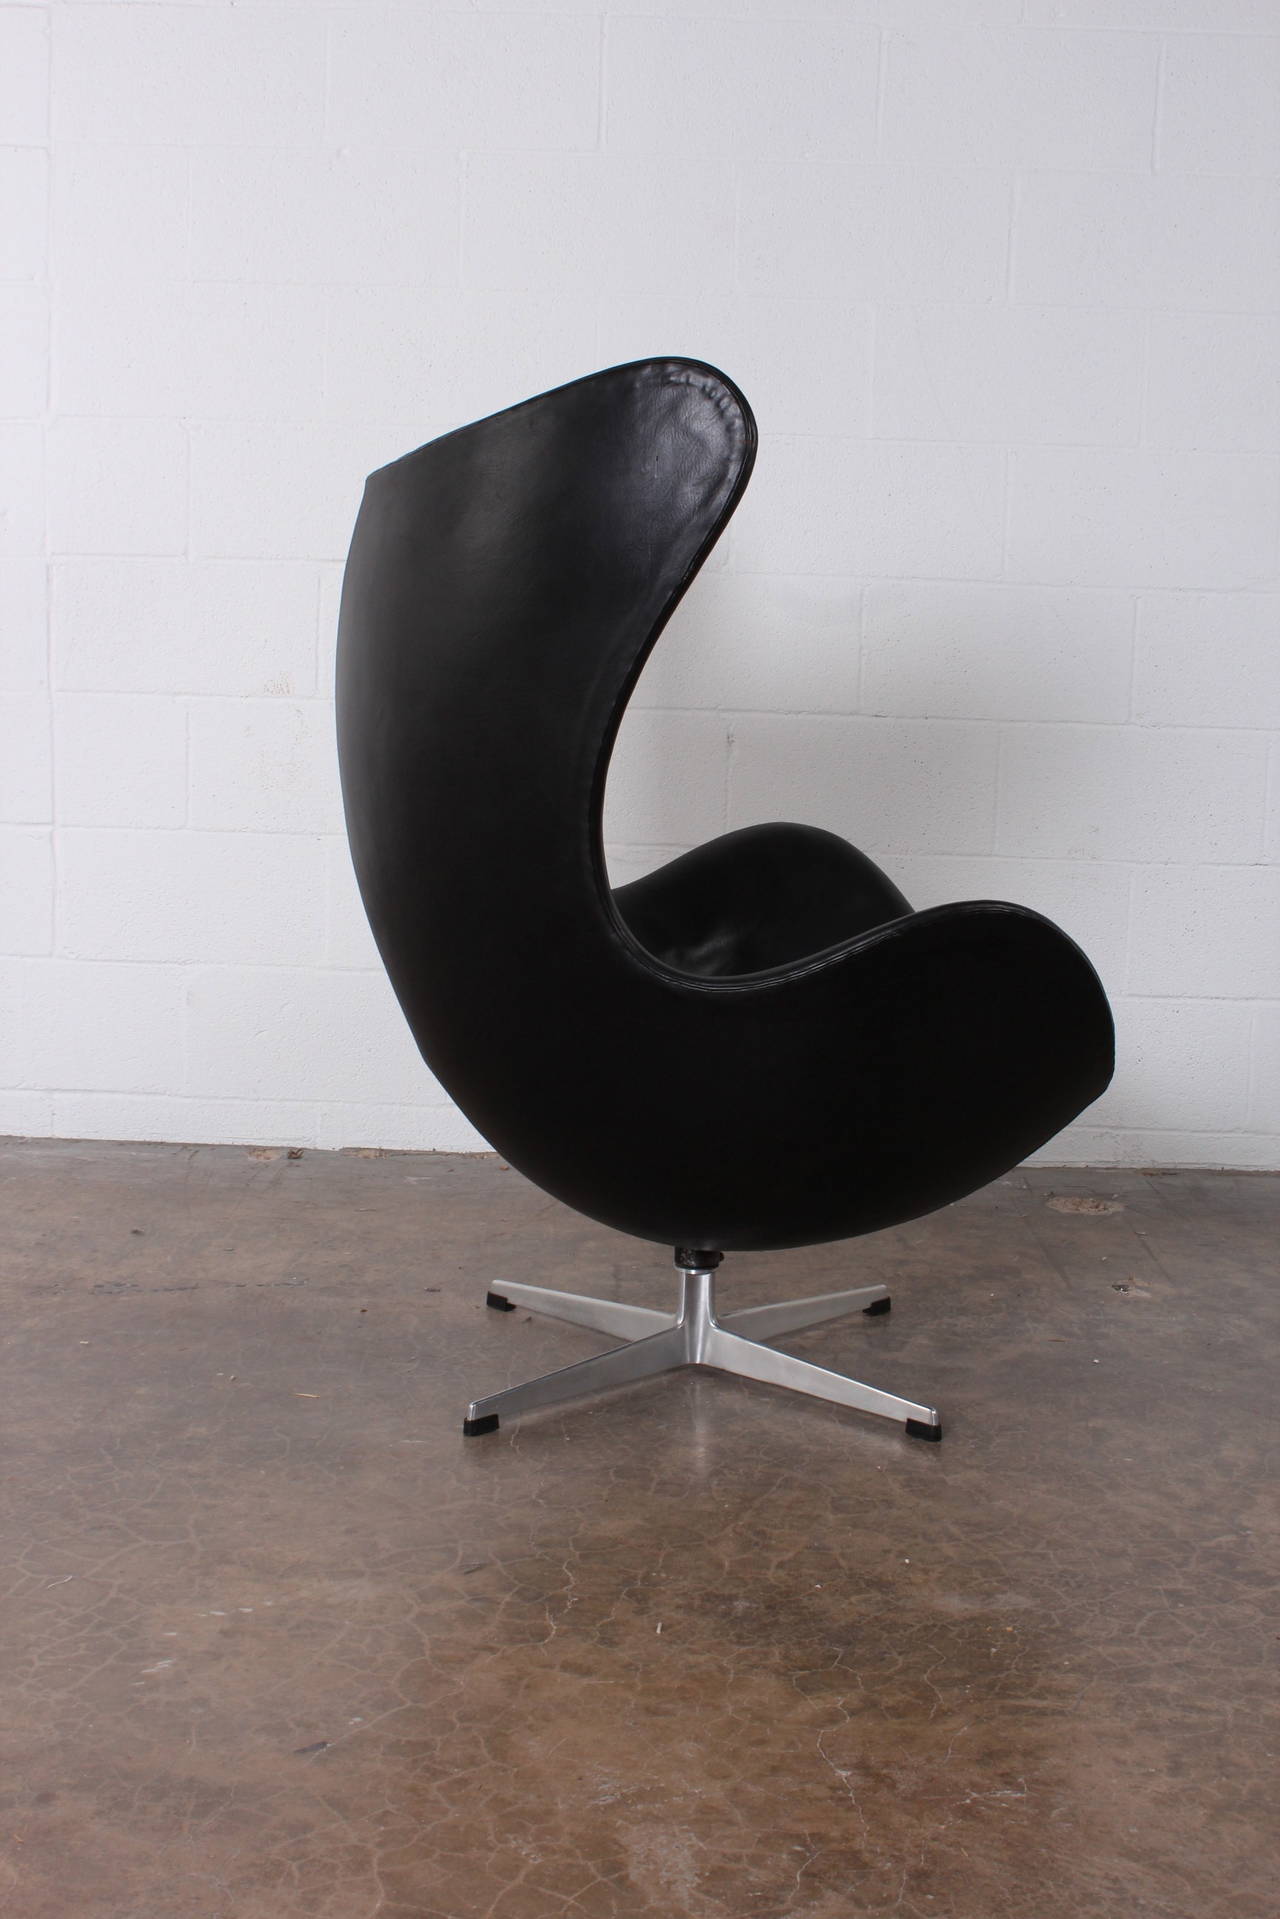 Mid-20th Century Egg Chair by Arne Jacobsen in Original Leather